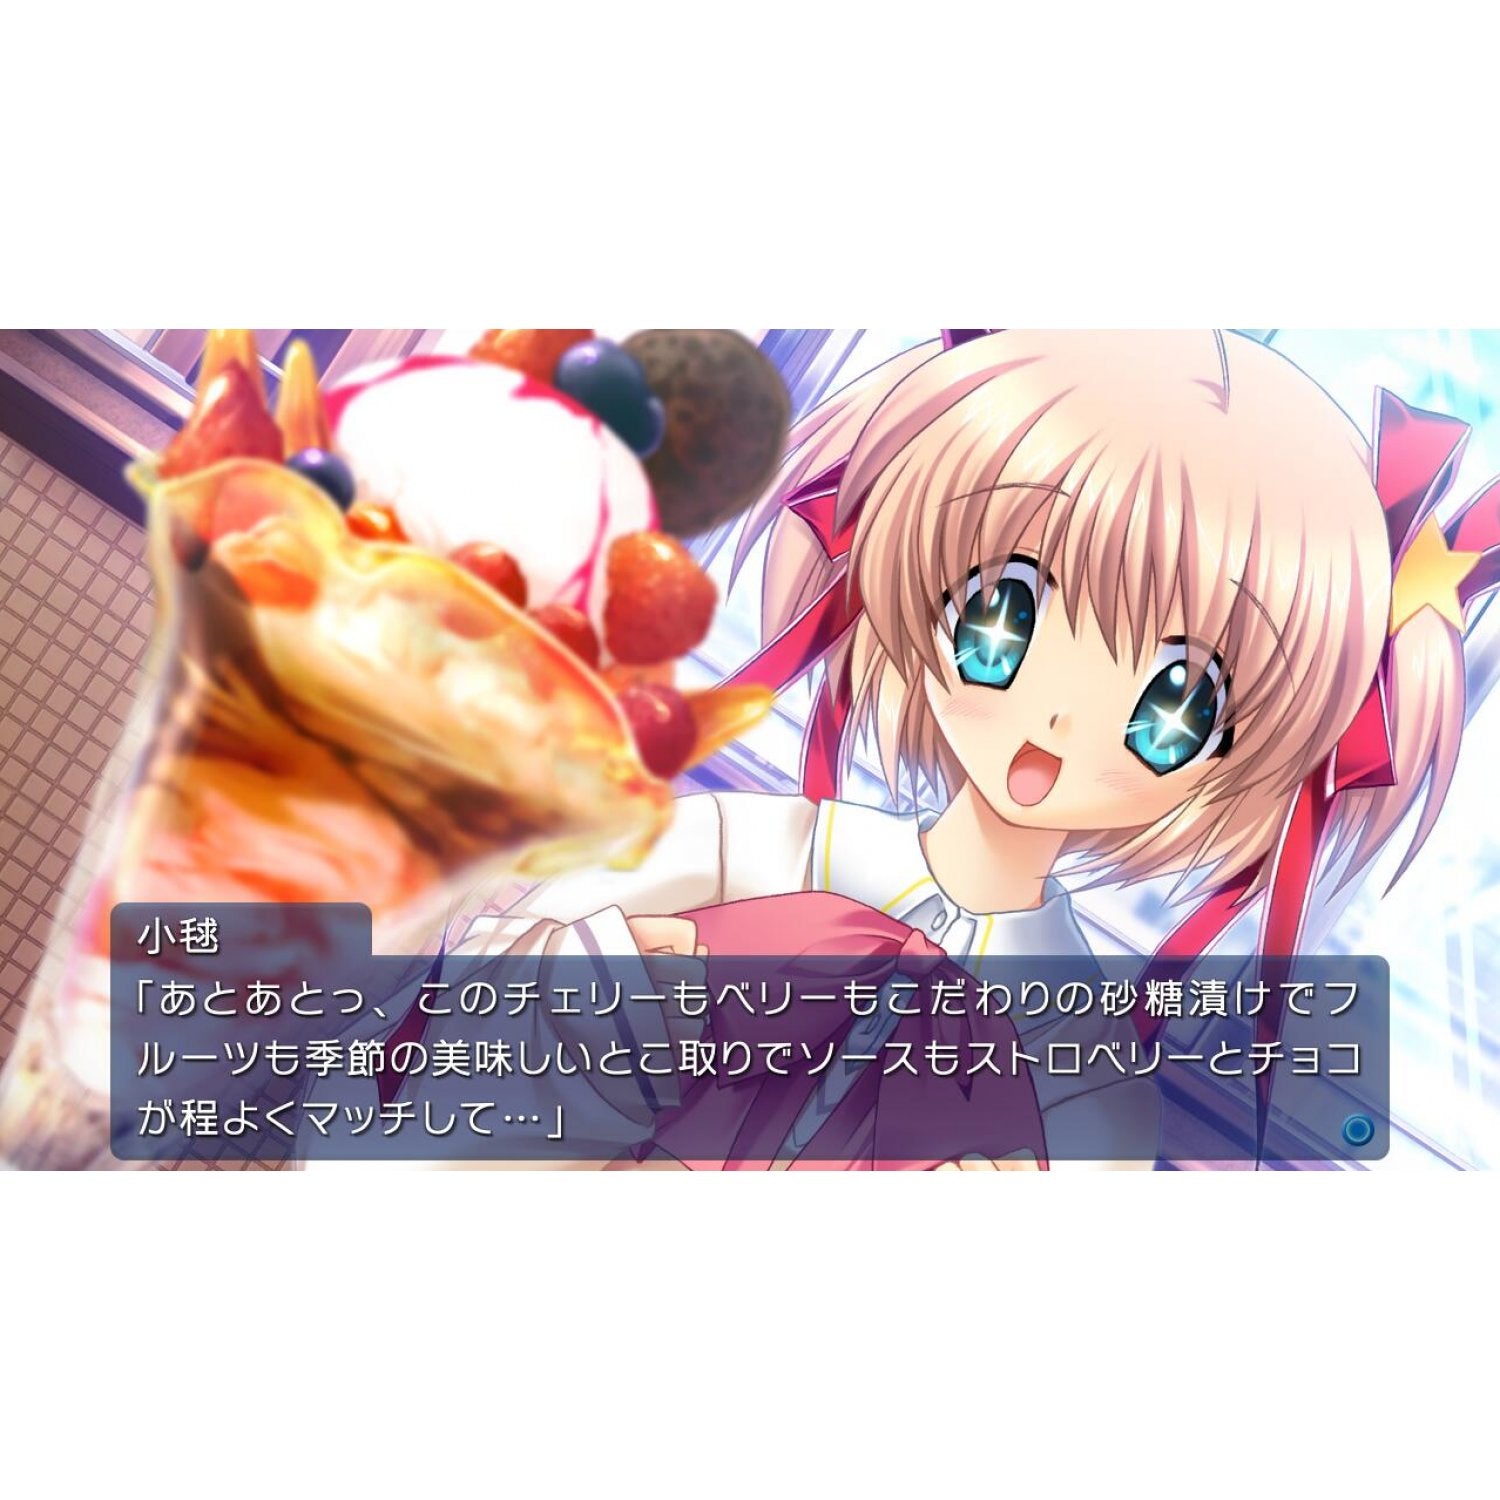 Little Busters! Converted Edition scene c